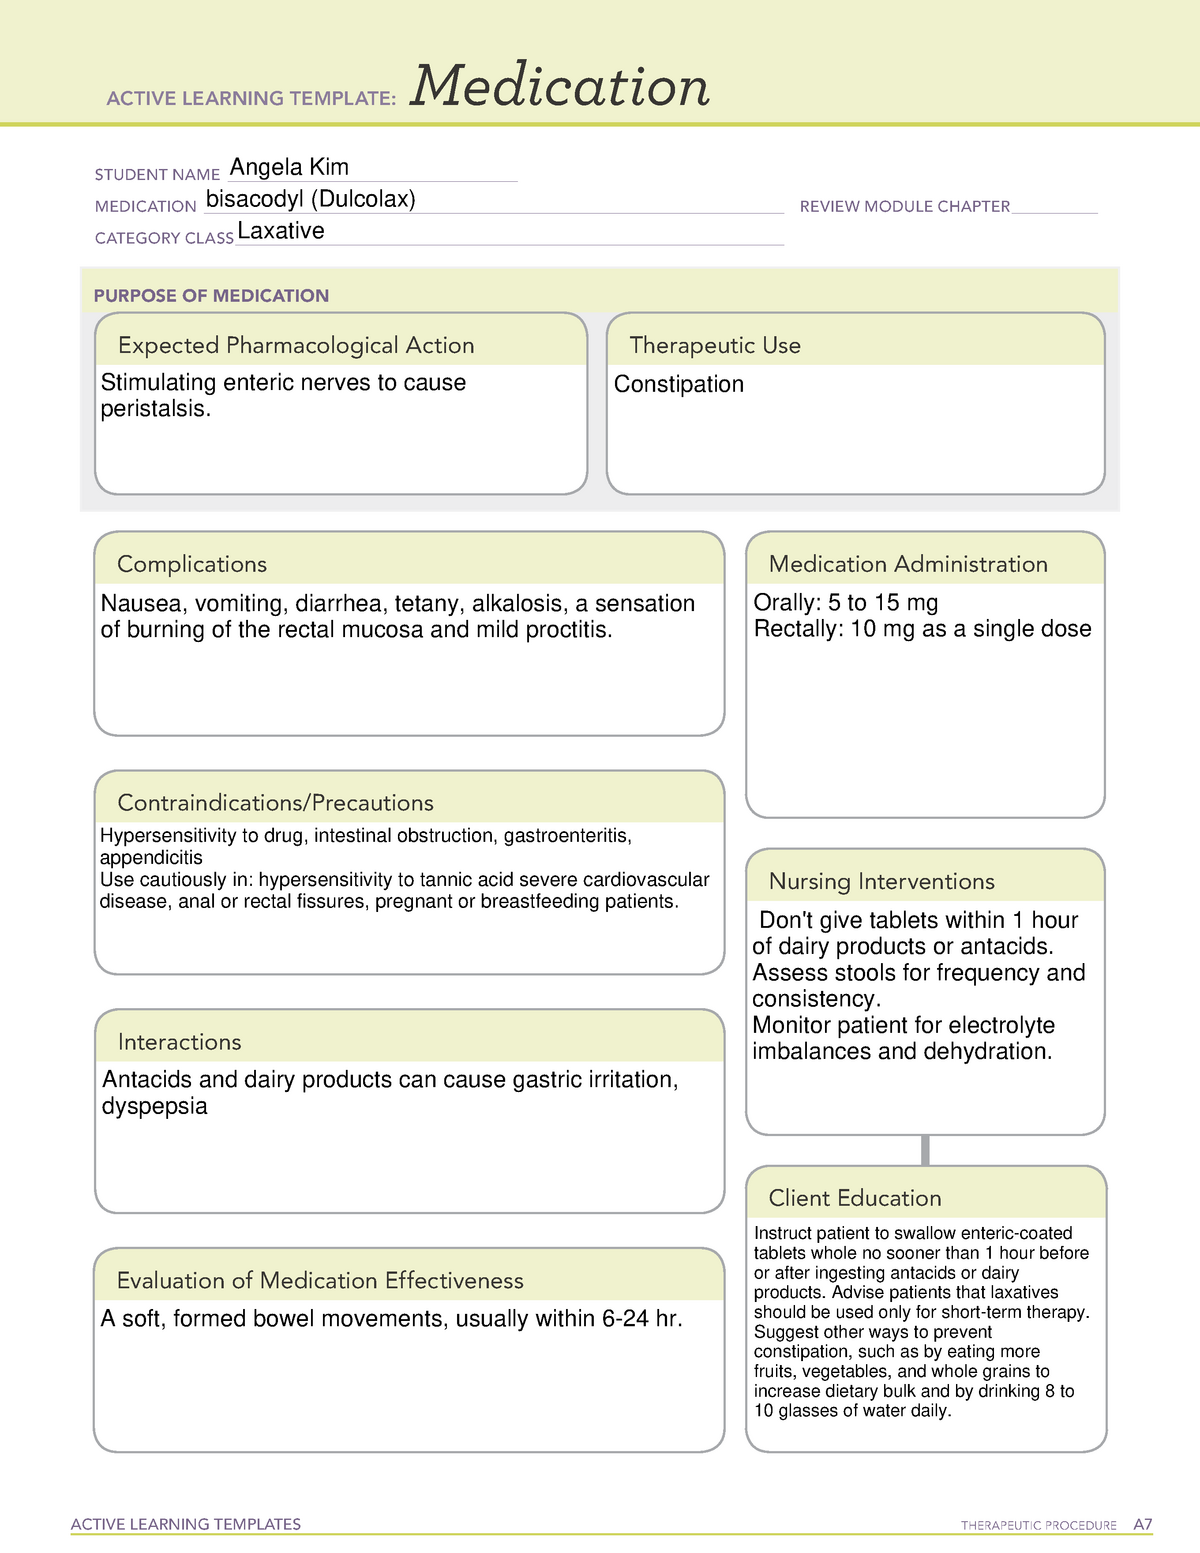 Bisacodyl (Dulcolax) ATI ACTIVE LEARNING TEMPLATES THERAPEUTIC